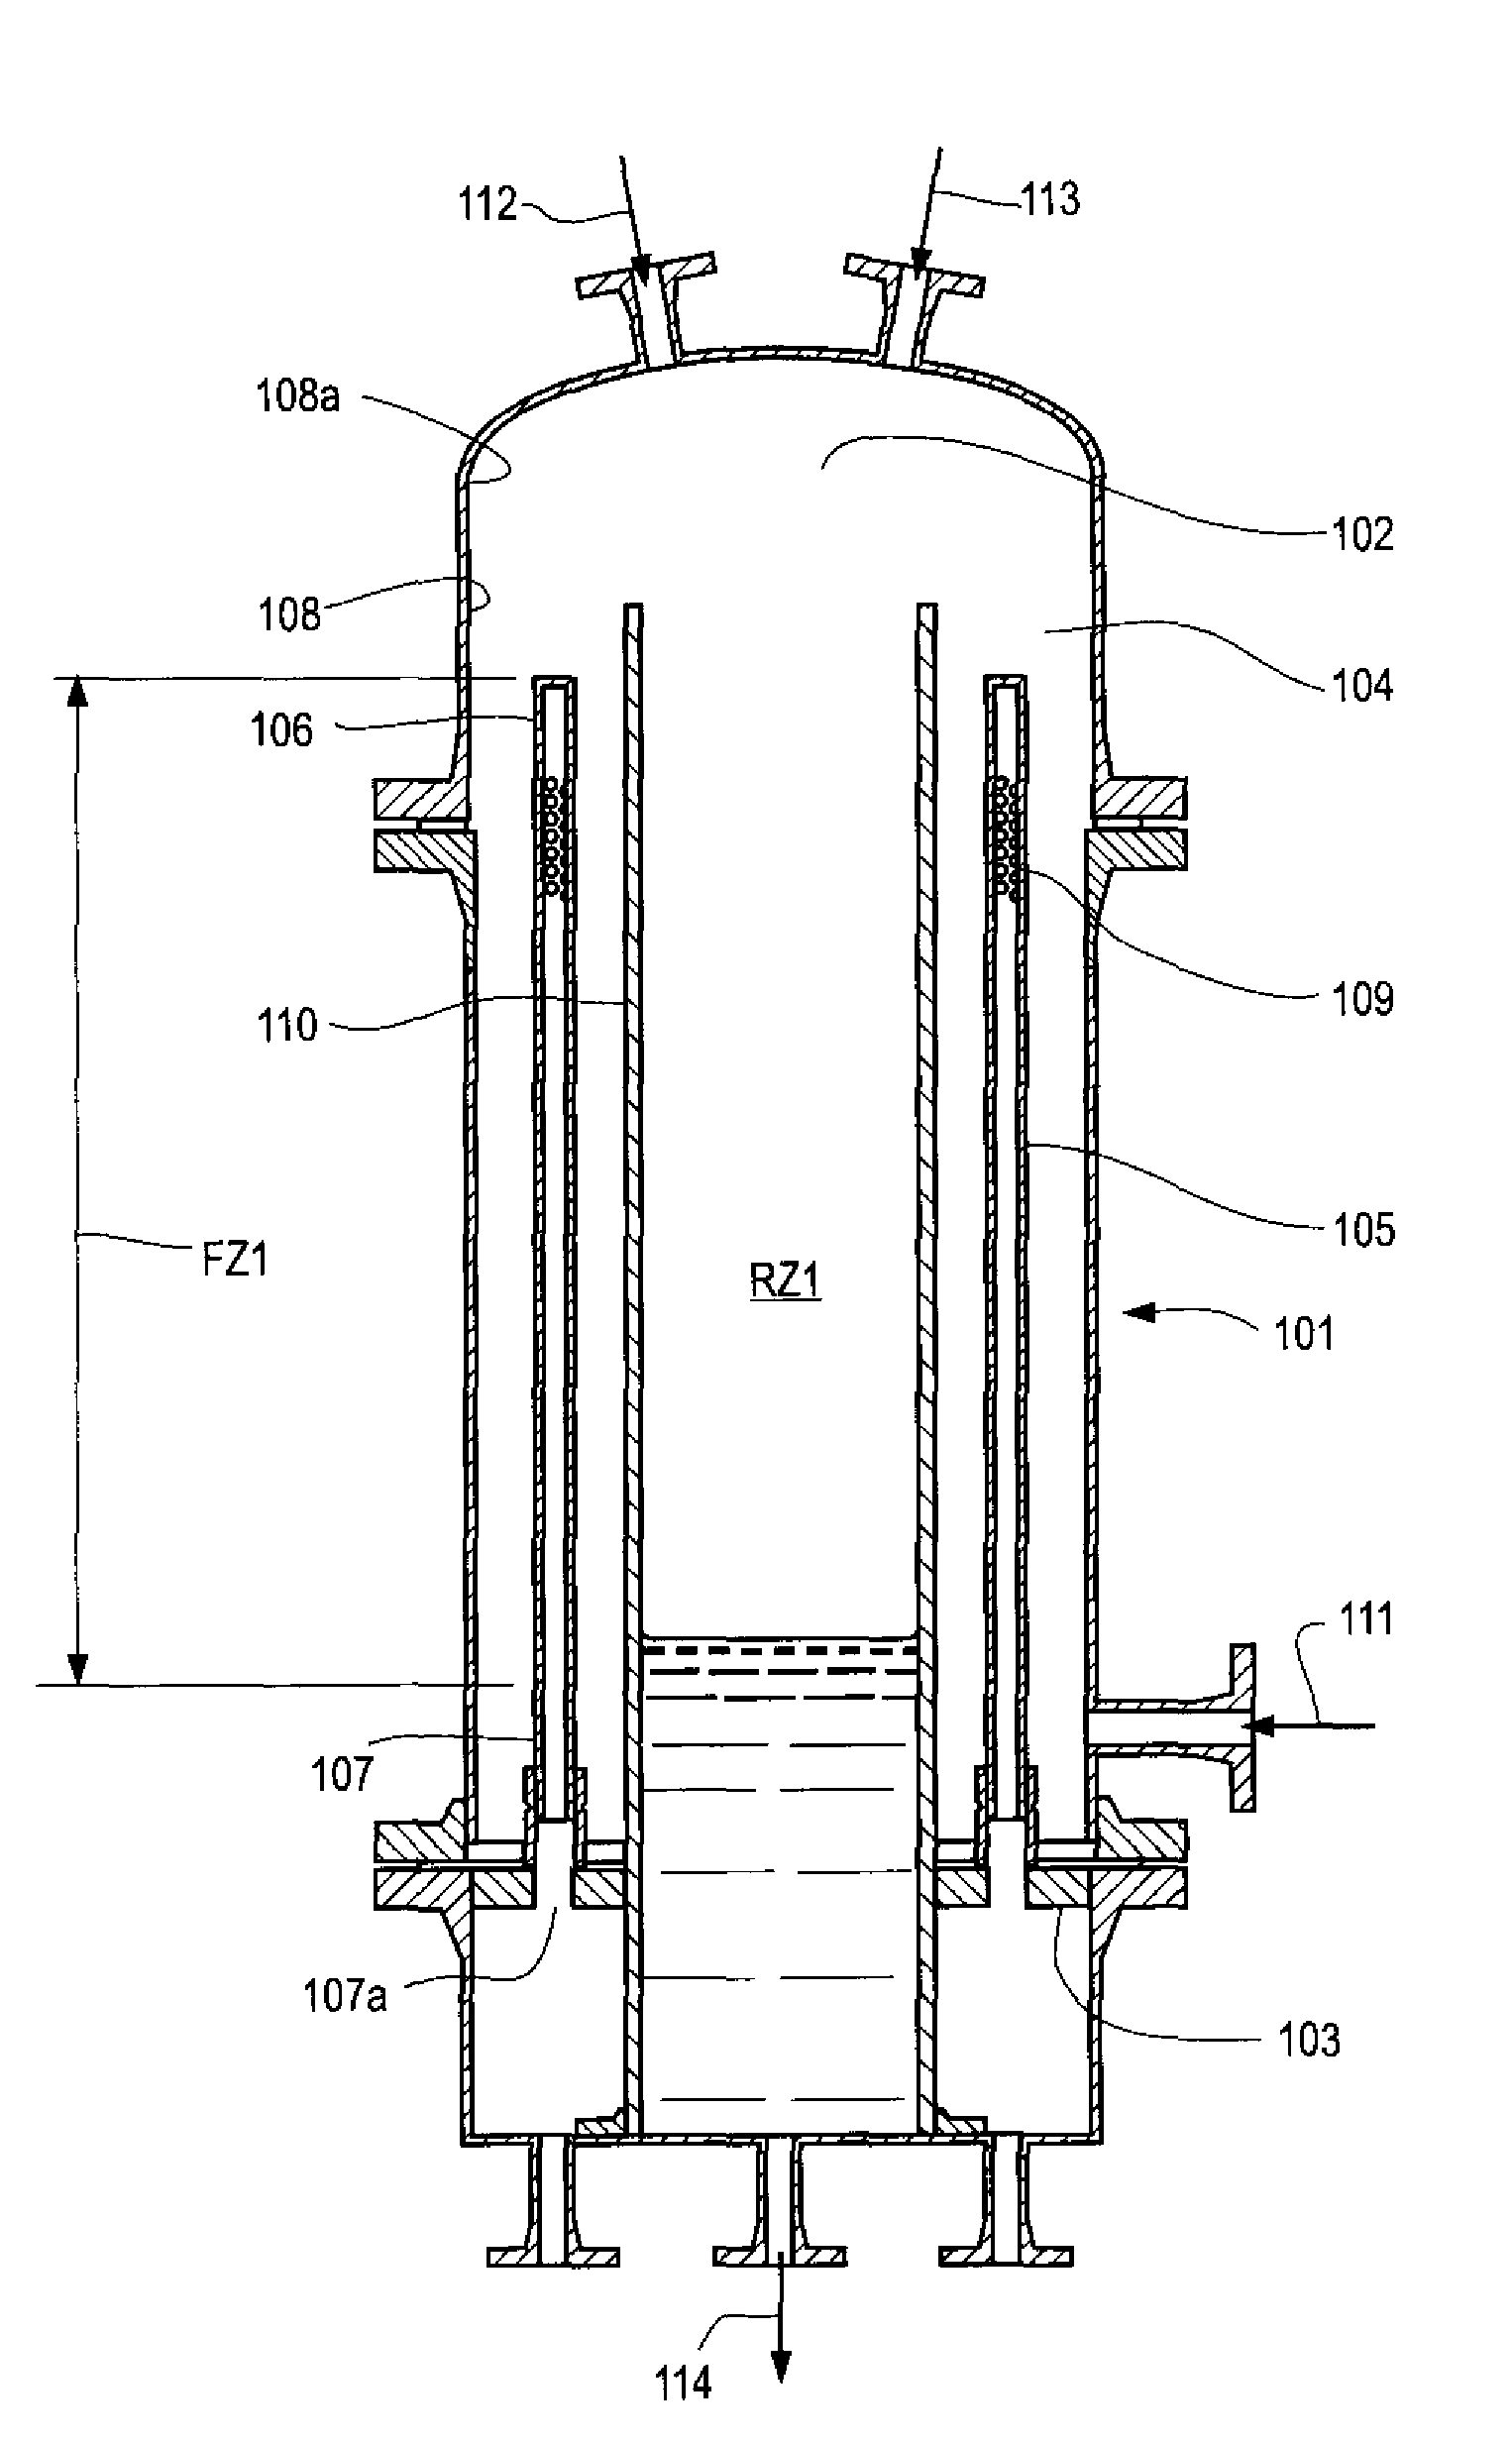 Apparatus and process for the separation of solids and liquids